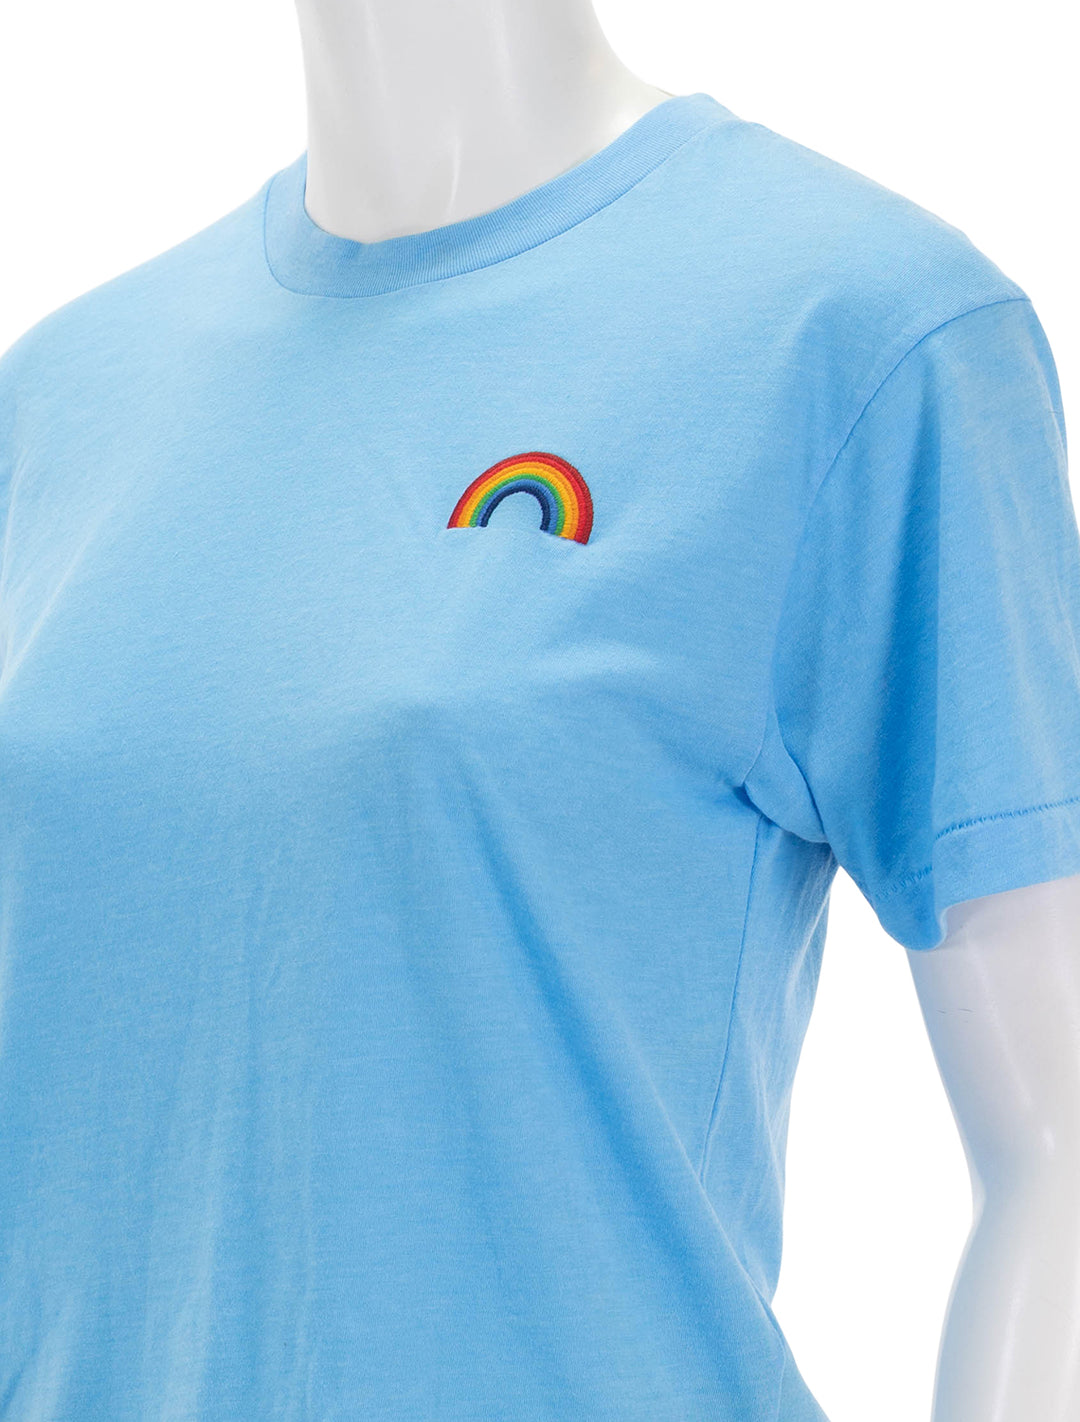 Close-up view of Aviator Nation's rainbow embroidery boyfriend tee in sky.